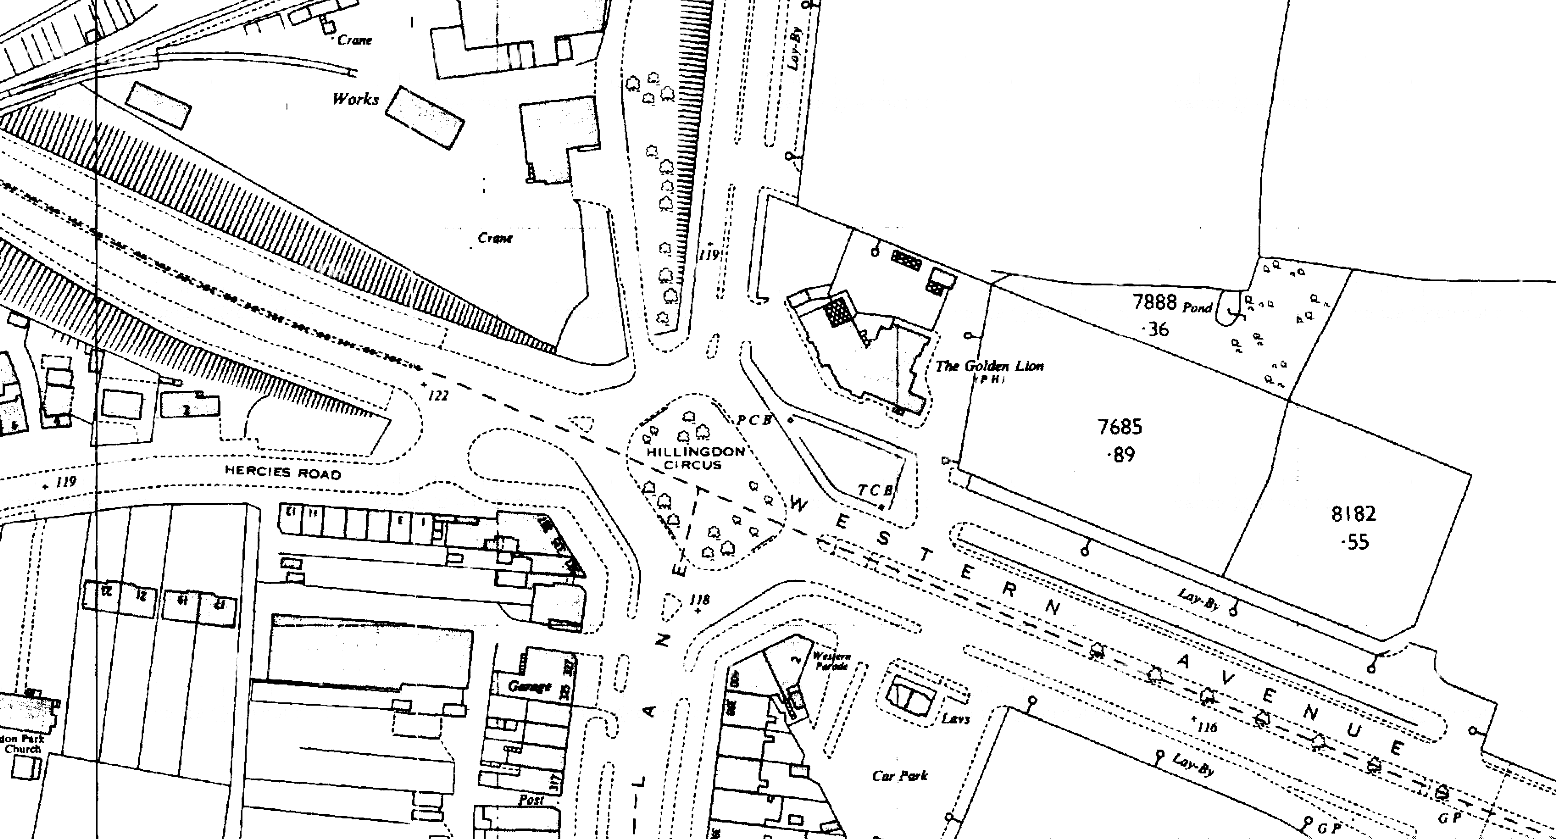 X54--Hillingdon Circus Box--1963 OS map 1-2500 scale.png